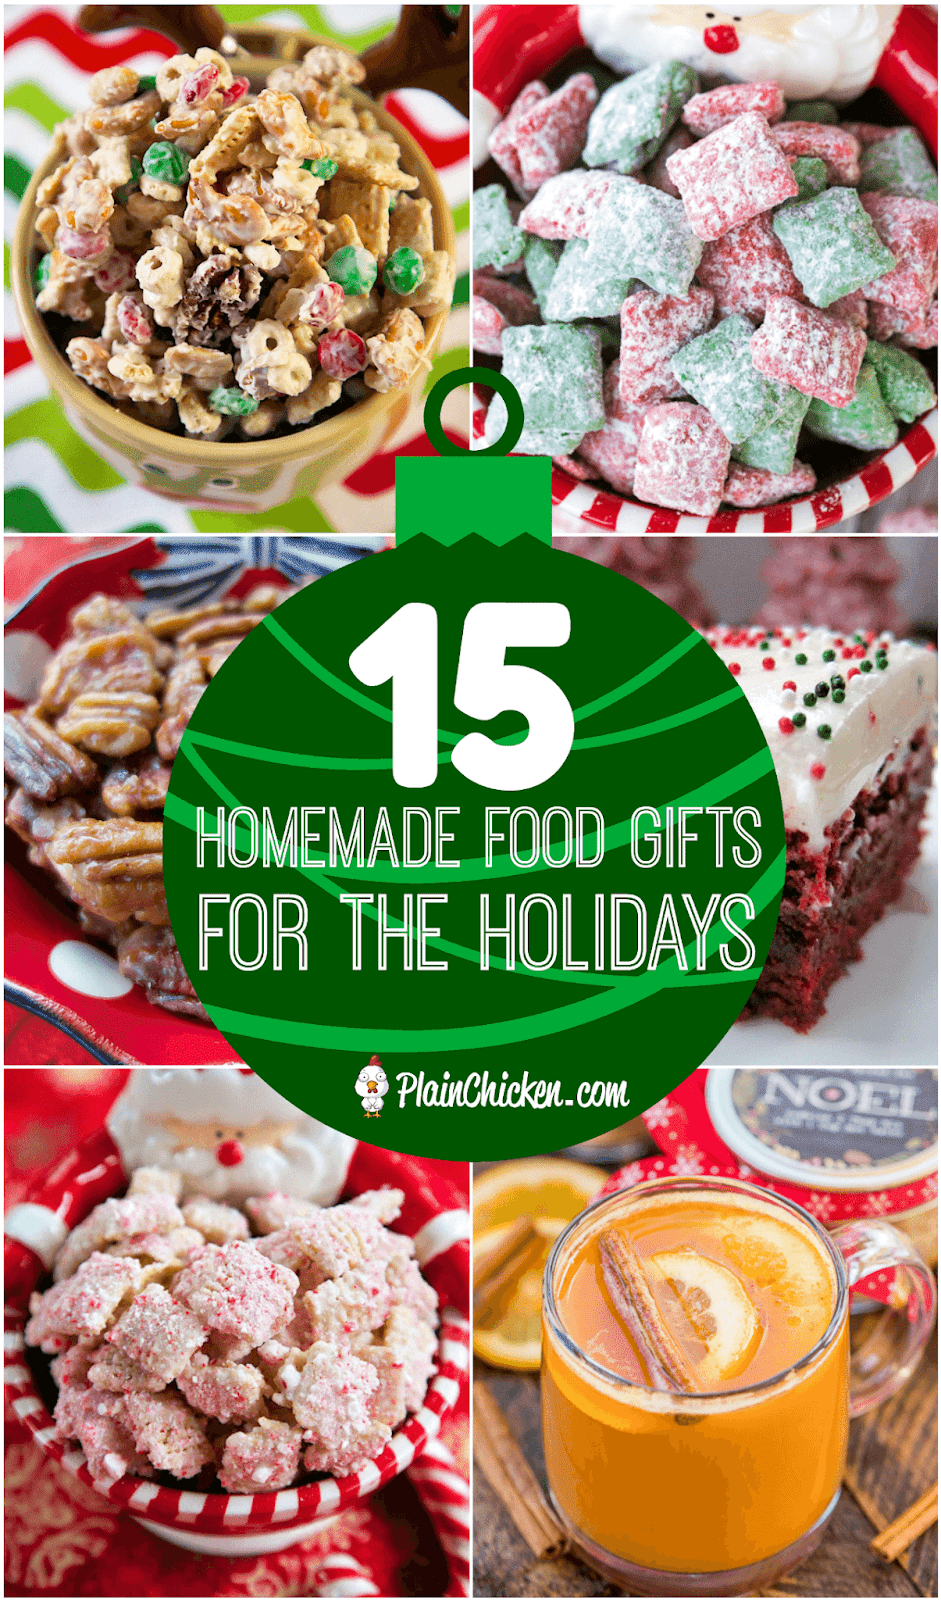 15 Homemade Food Gifts for the Holidays | Plain Chicken®